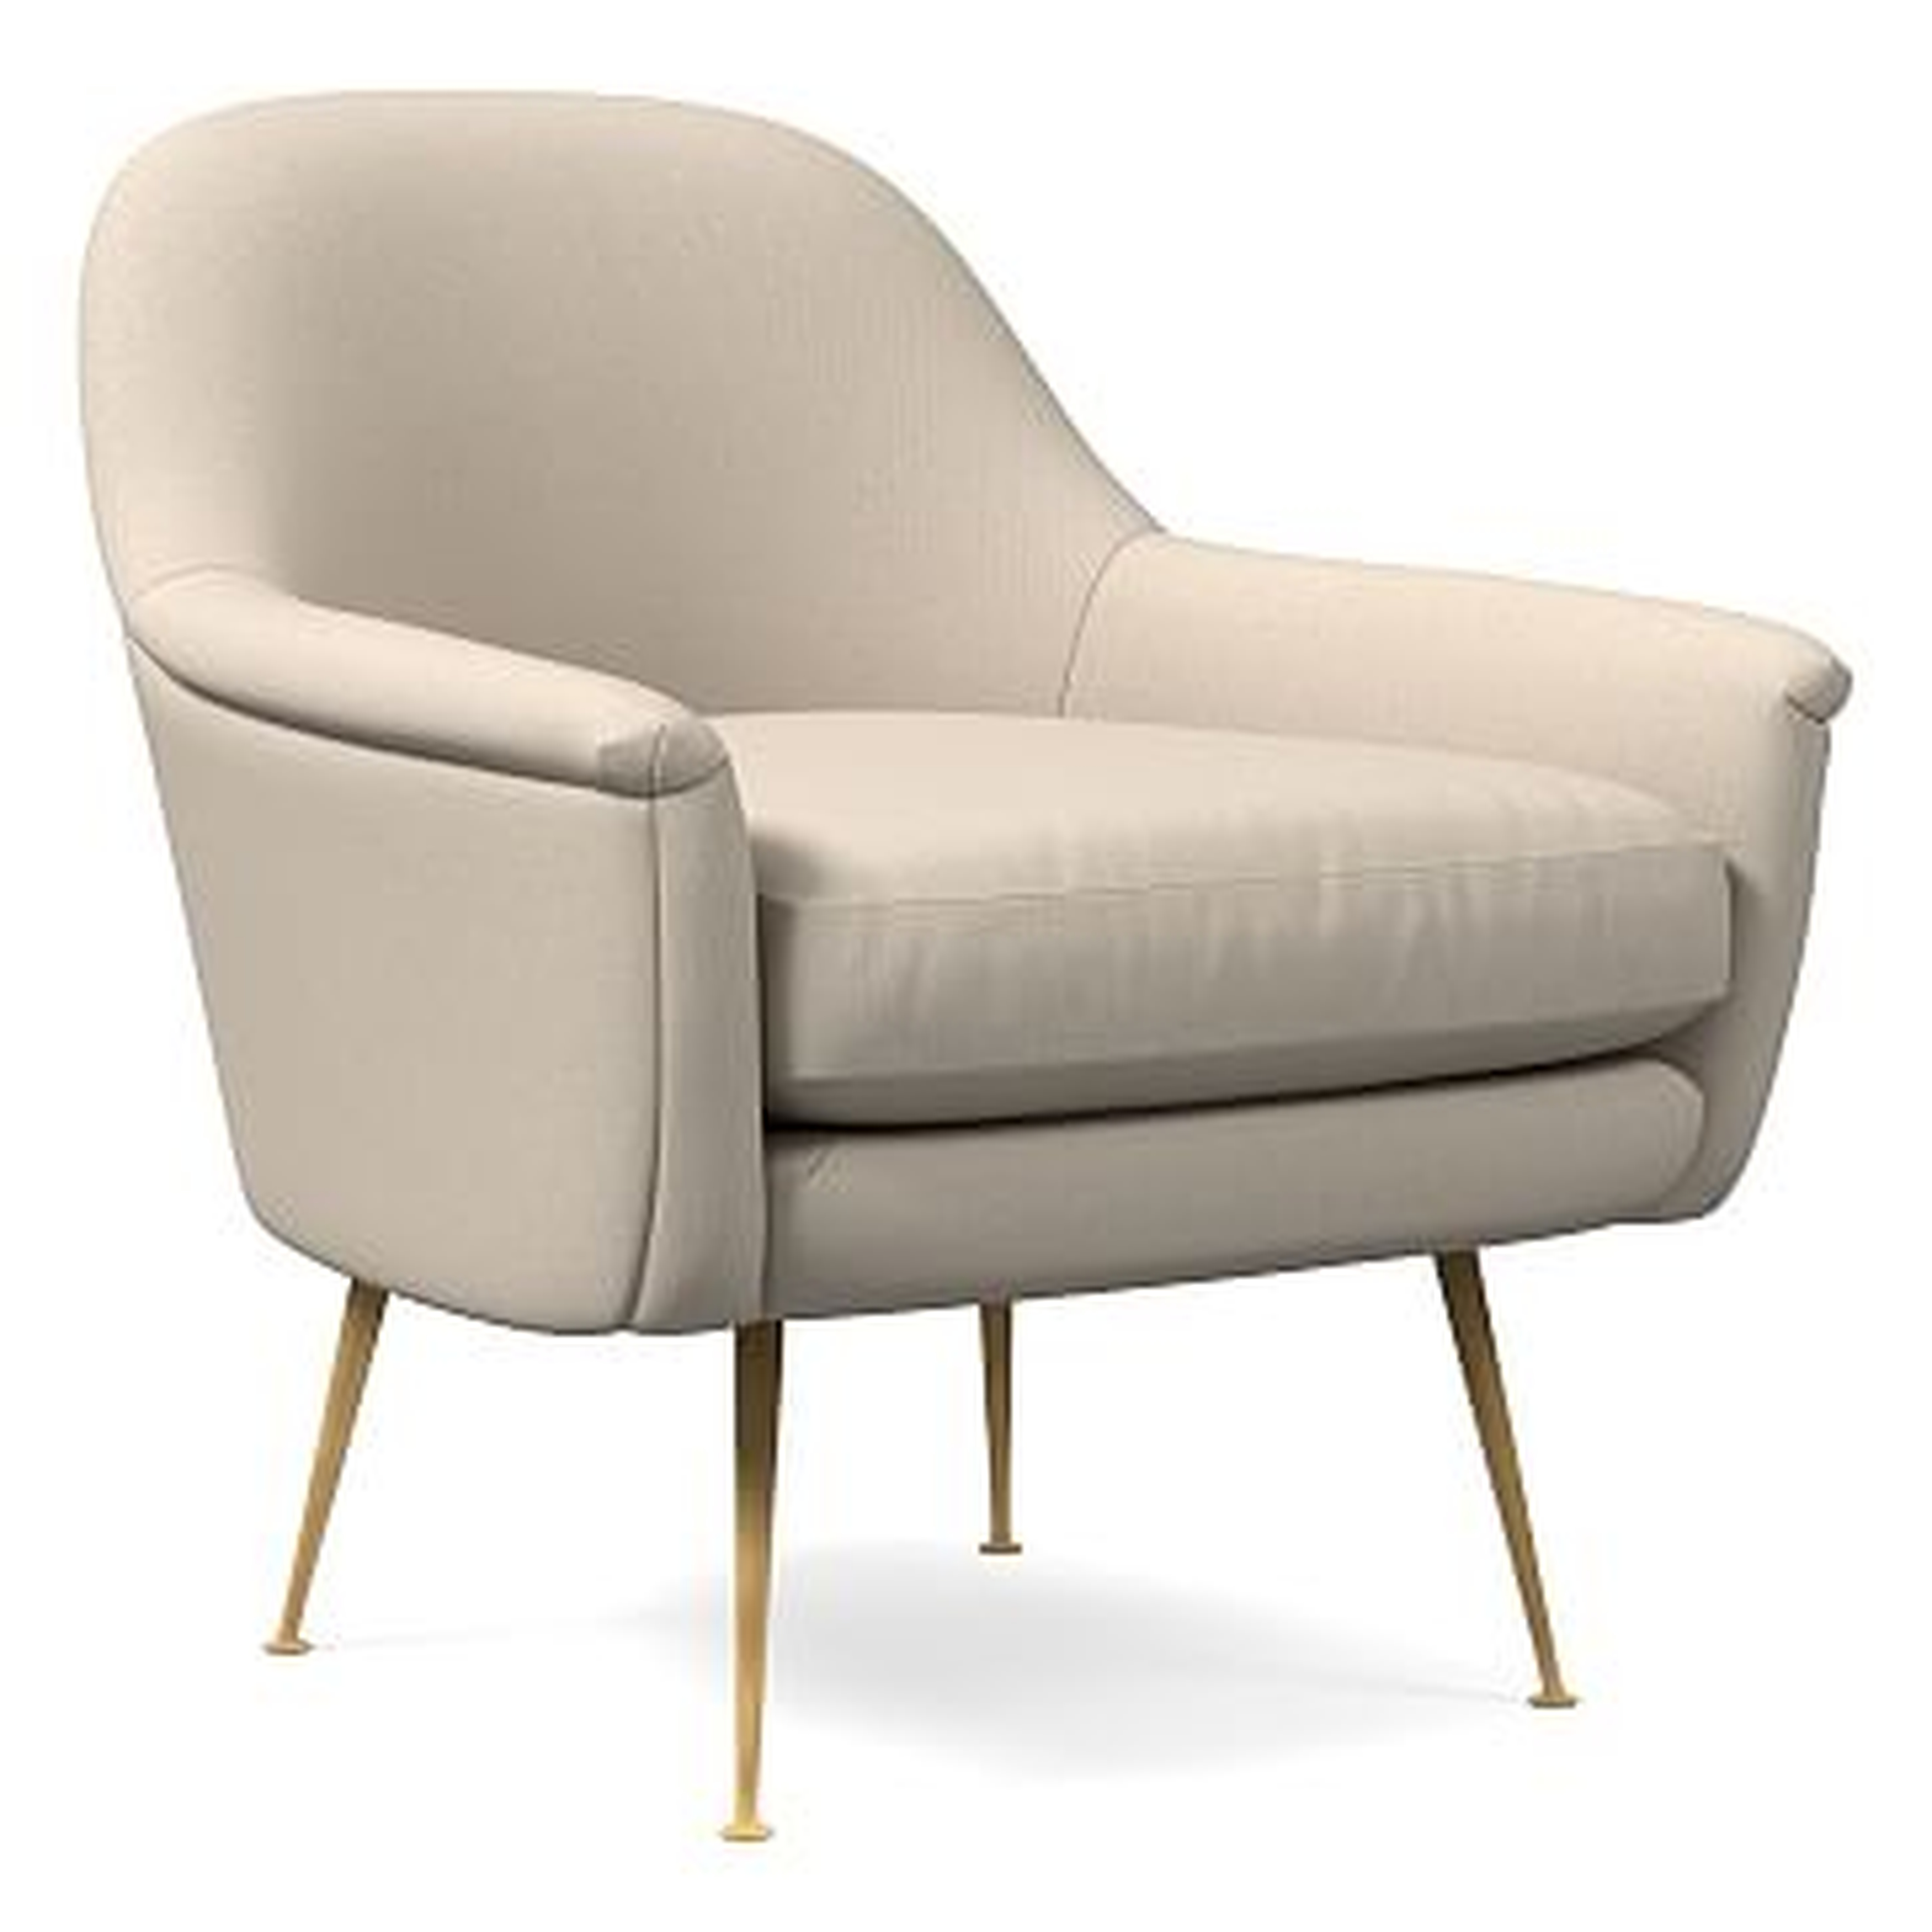 Phoebe Midcentury Chair, Poly, Performance Washed Canvas, Natural, Brass - West Elm